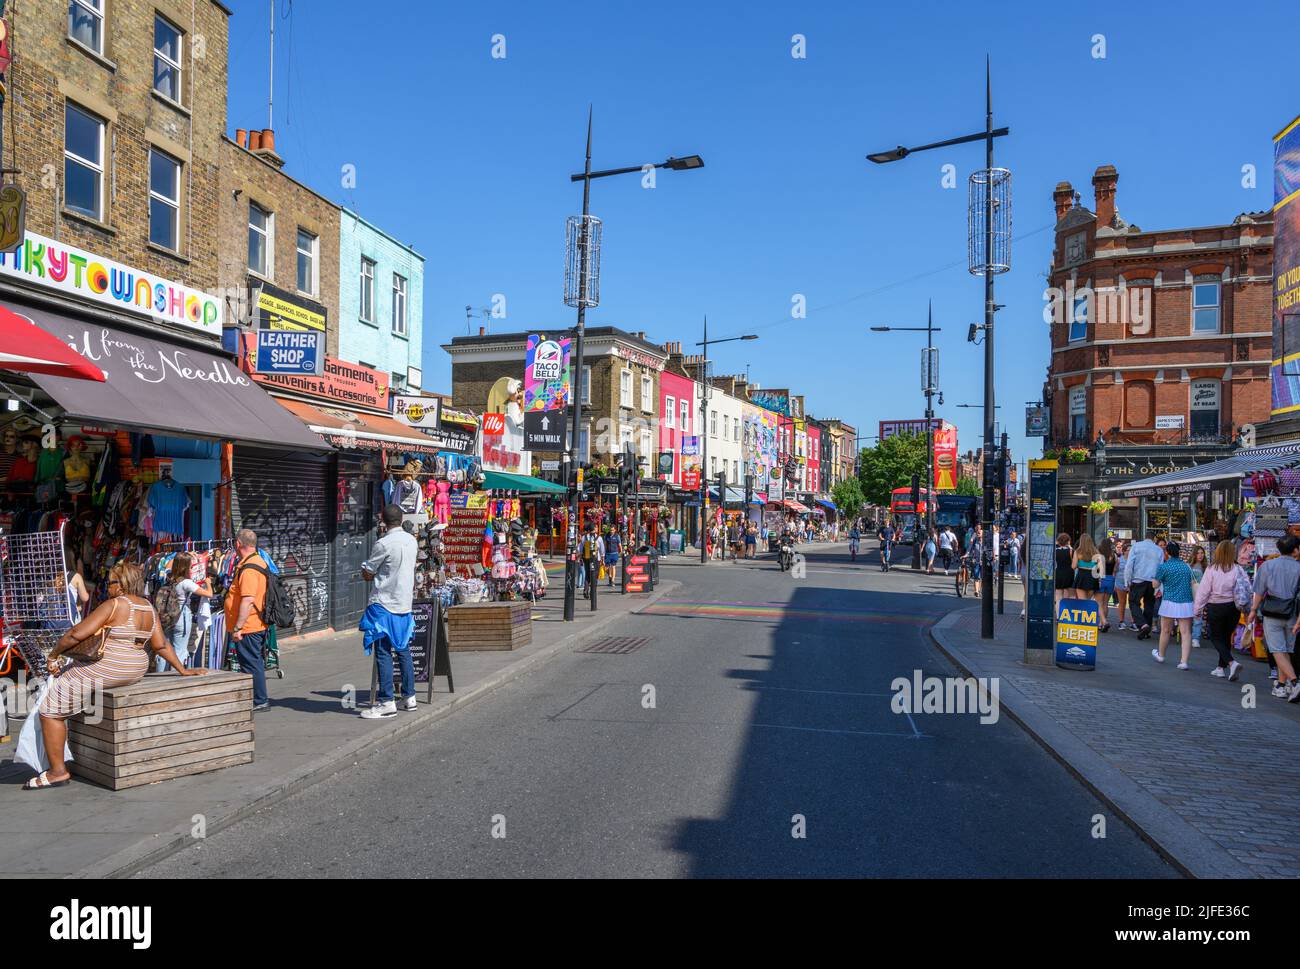 Boutiques sur Camden High Street, Camden, Londres, Angleterre, Royaume-Uni Banque D'Images